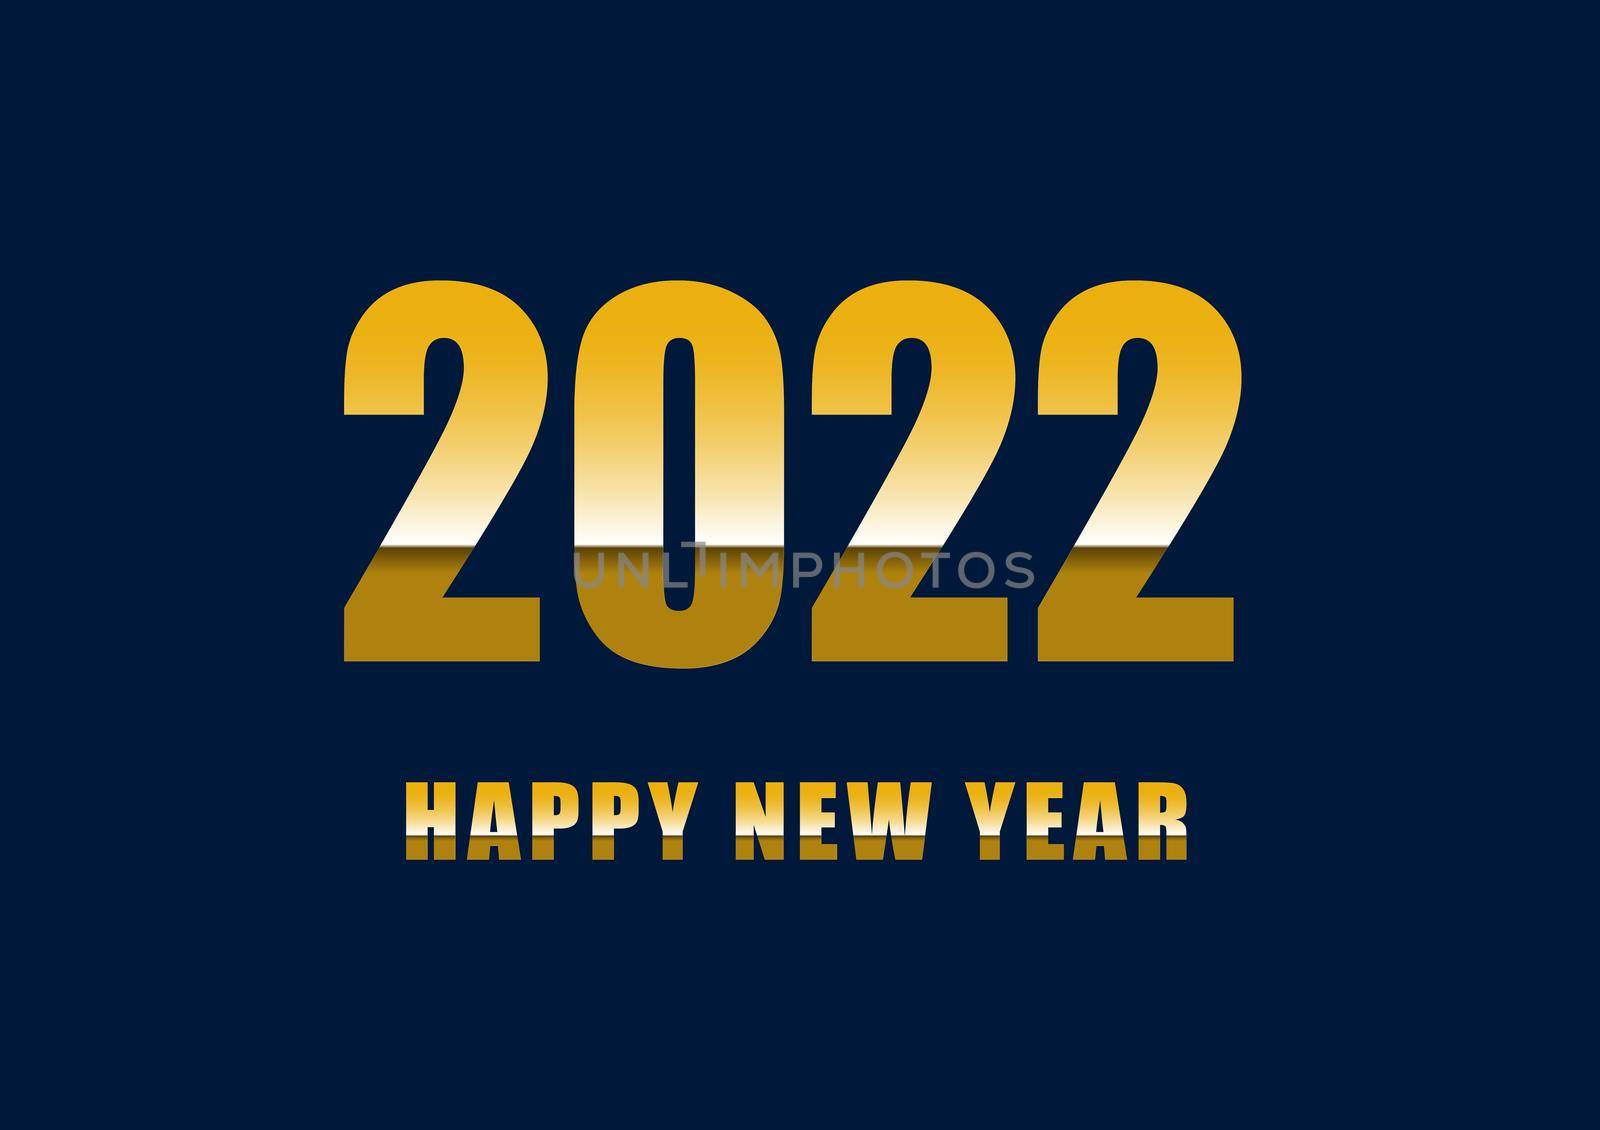 Happy new year 2022 with gradient text by punsayaporn